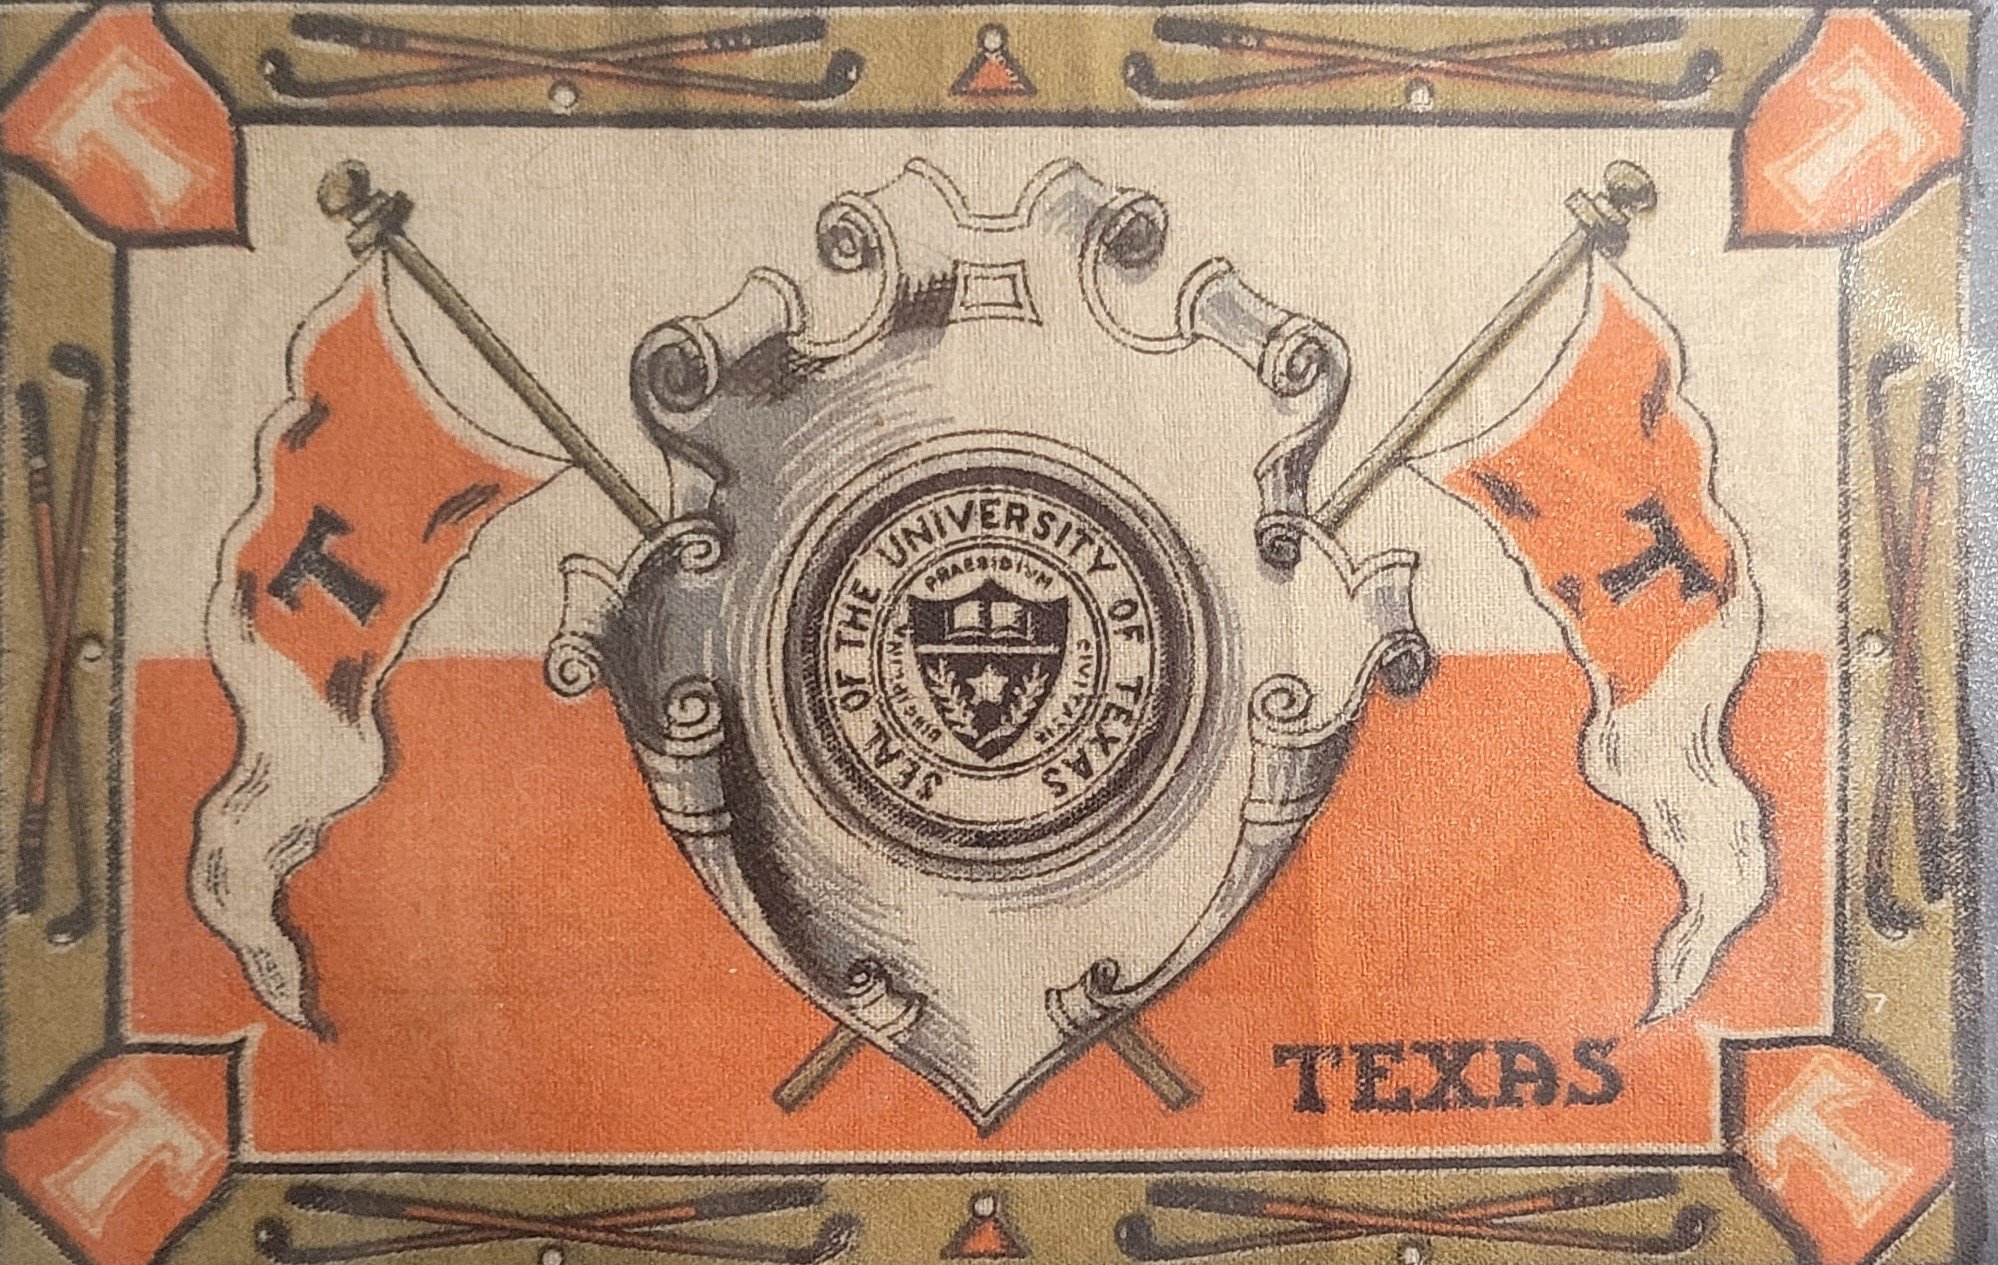 cloth, leather, or cloth Longhorn banners or seals  (1).jpg